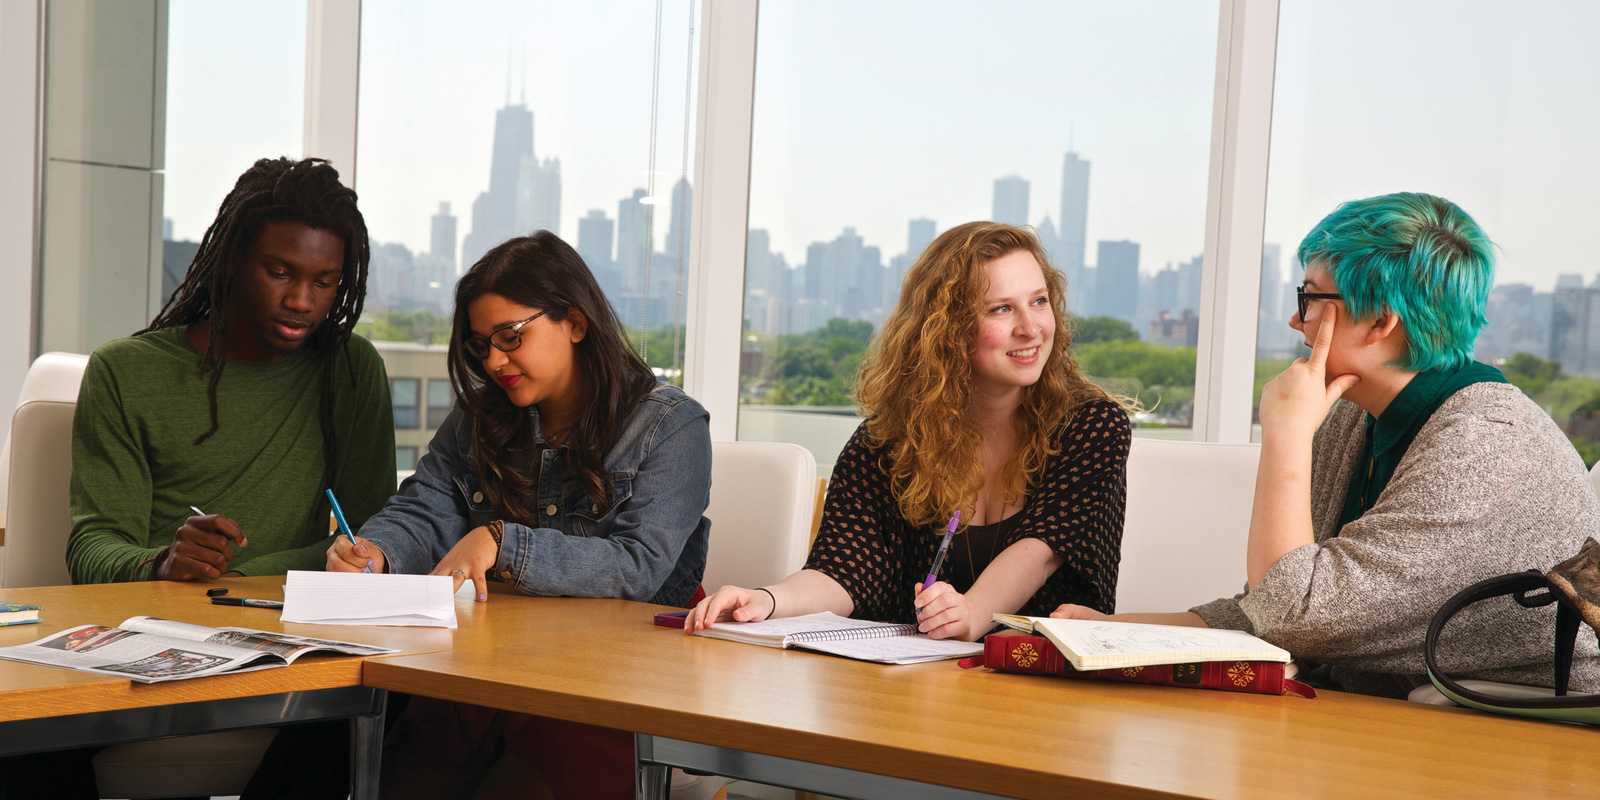 Students reviewing class notes behind the Chicago skyline.